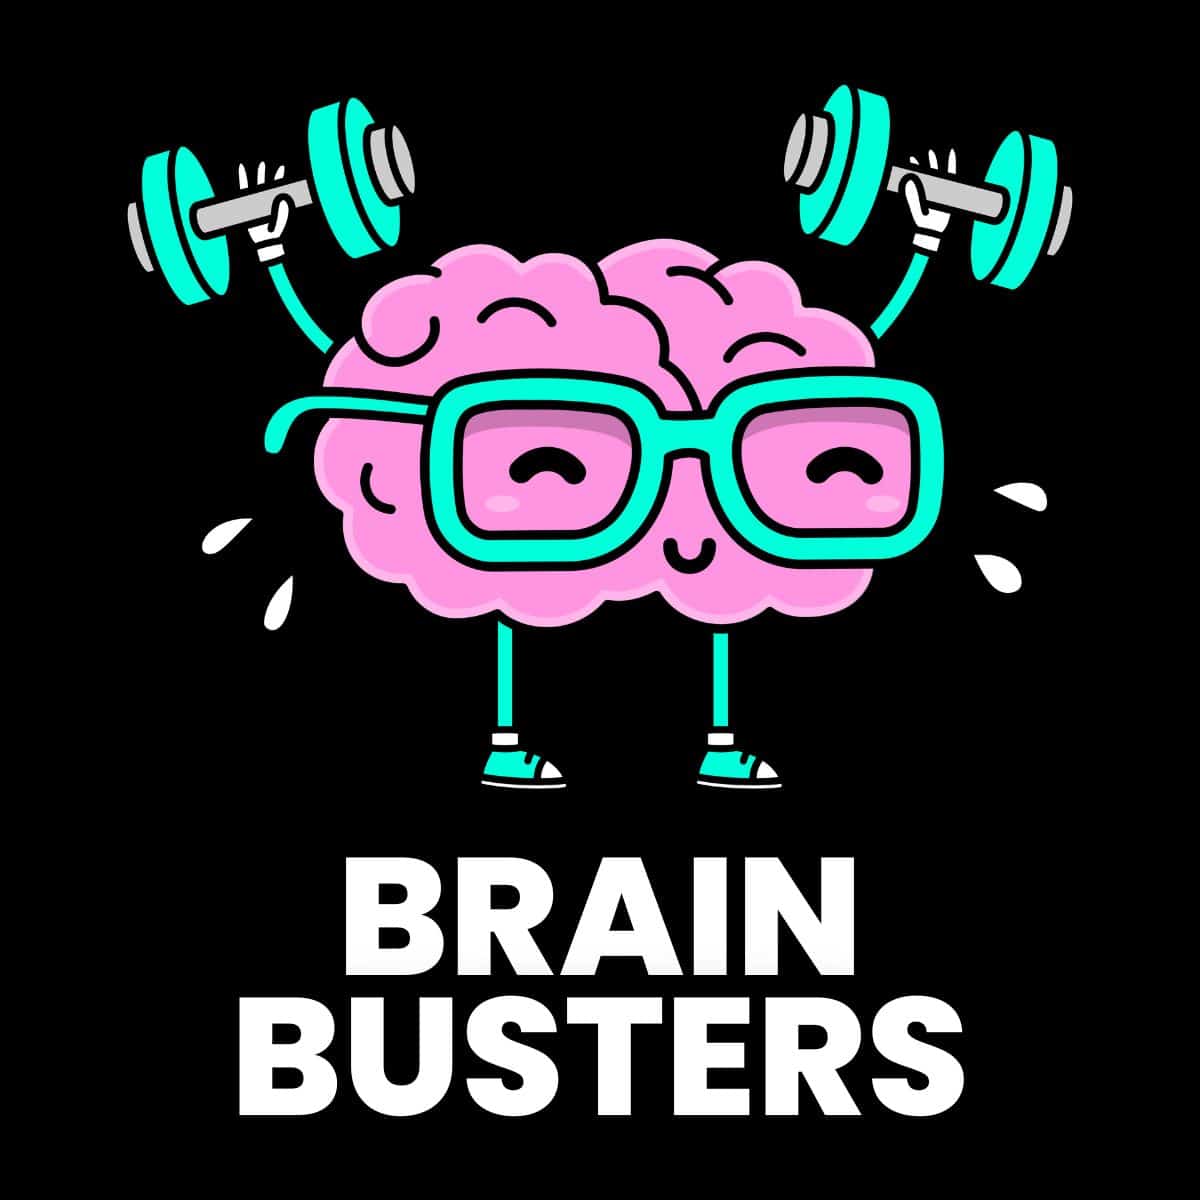 drawing of brain wearing glasses and lifting weights above text "brain busters"